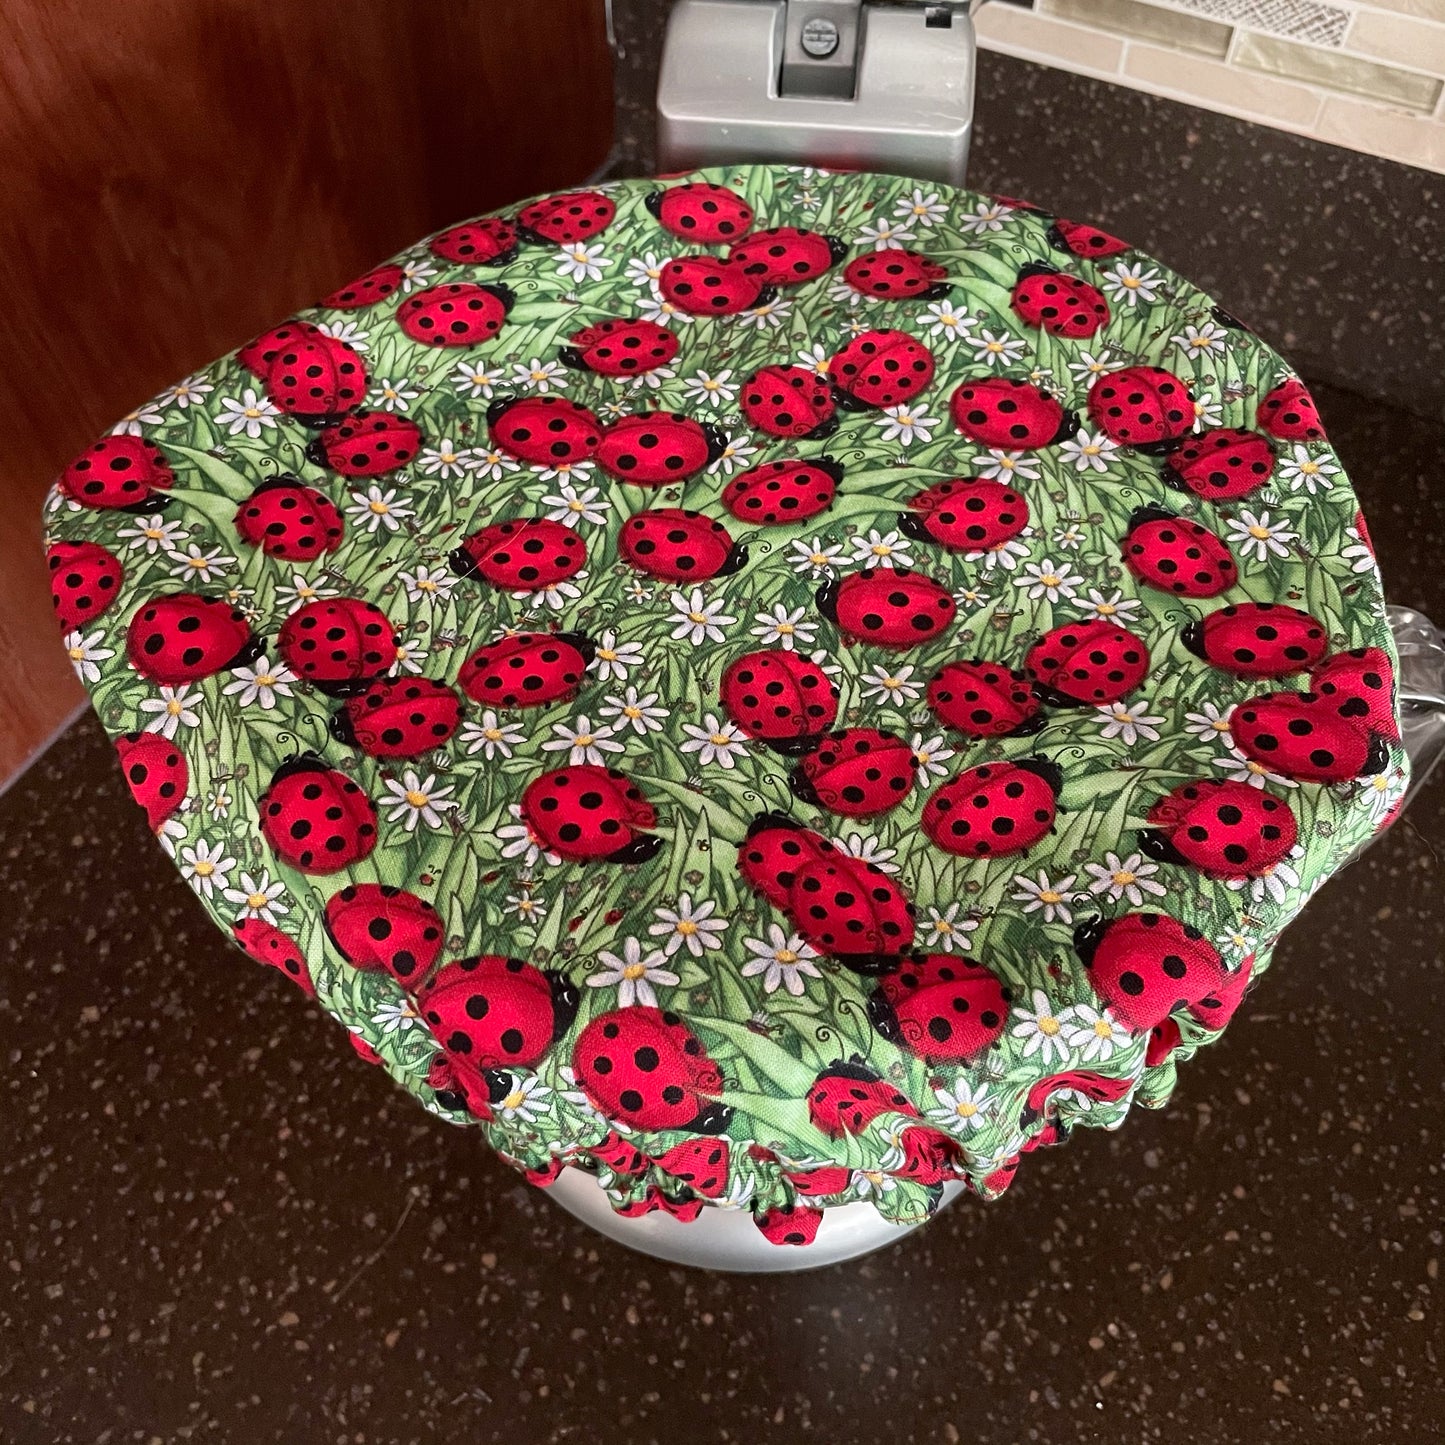 Stand Mixer Bowl Covers - Ladybugs